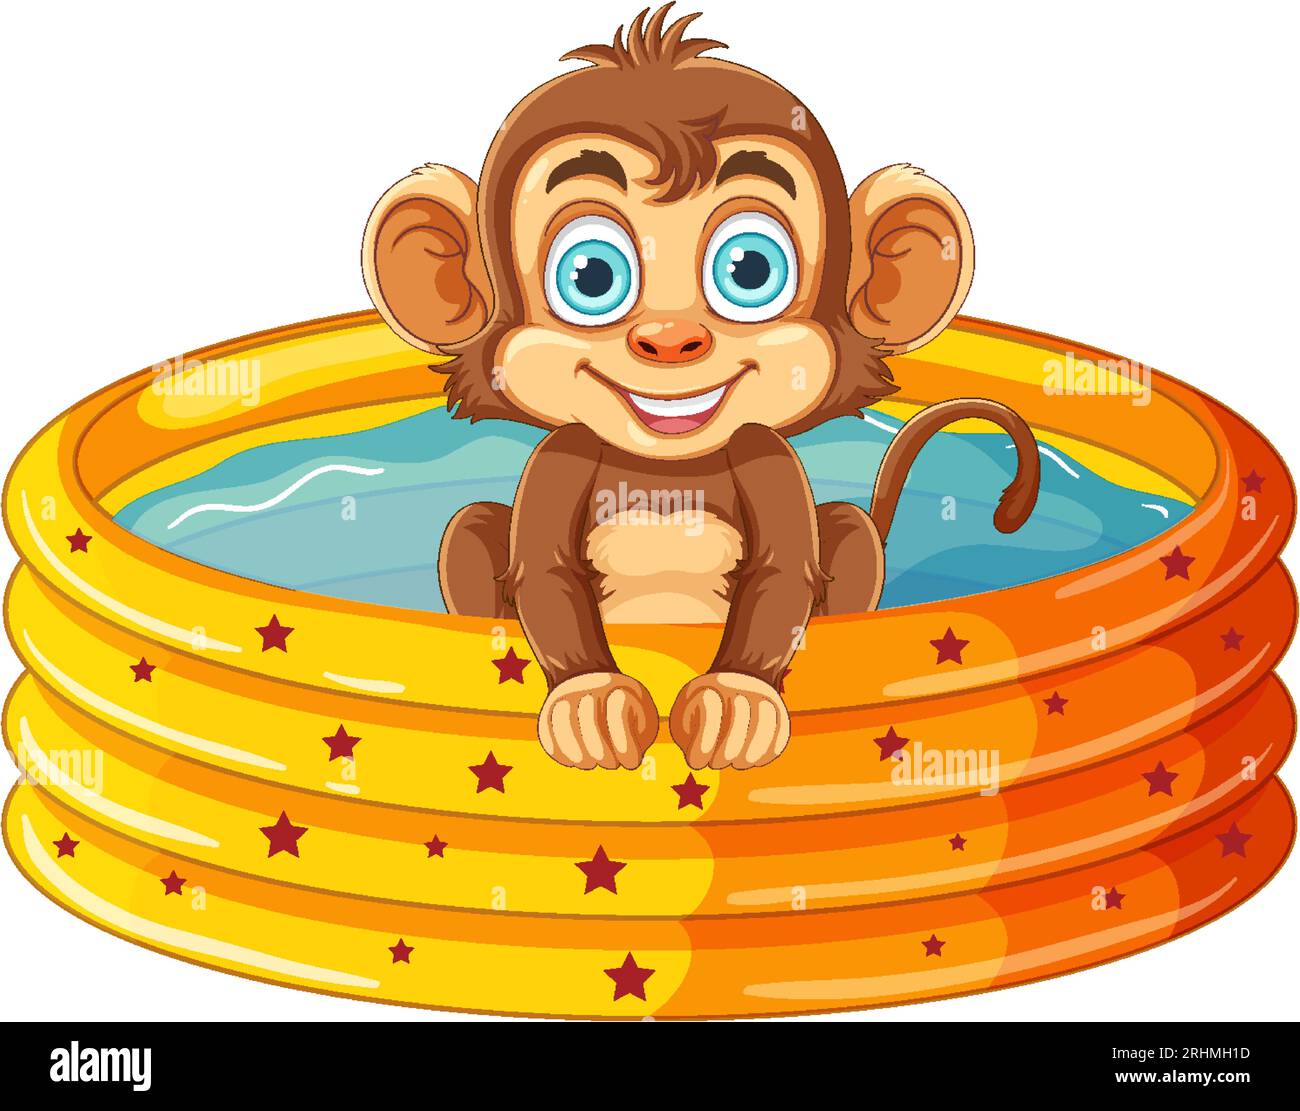 Cute money in inflatable pool illustration Stock Vector